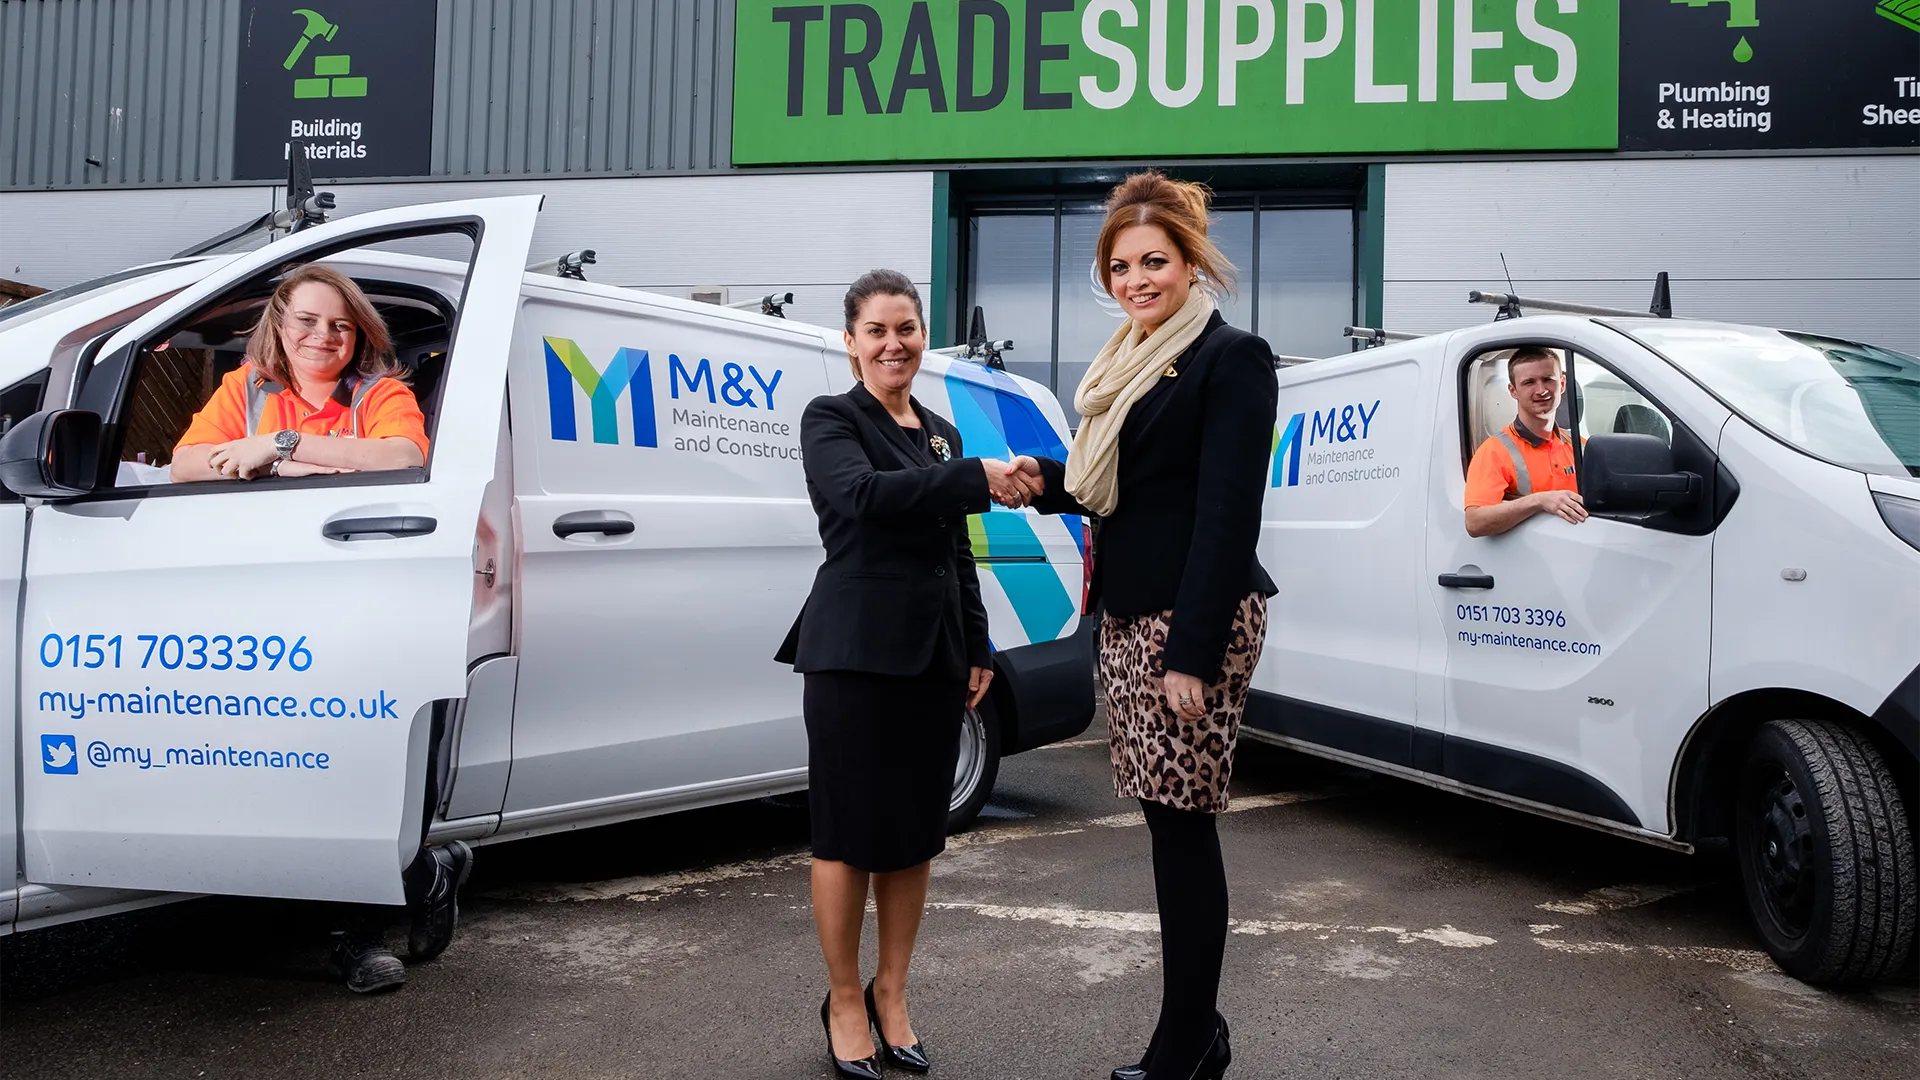 M&y partnership photo with trade supplies